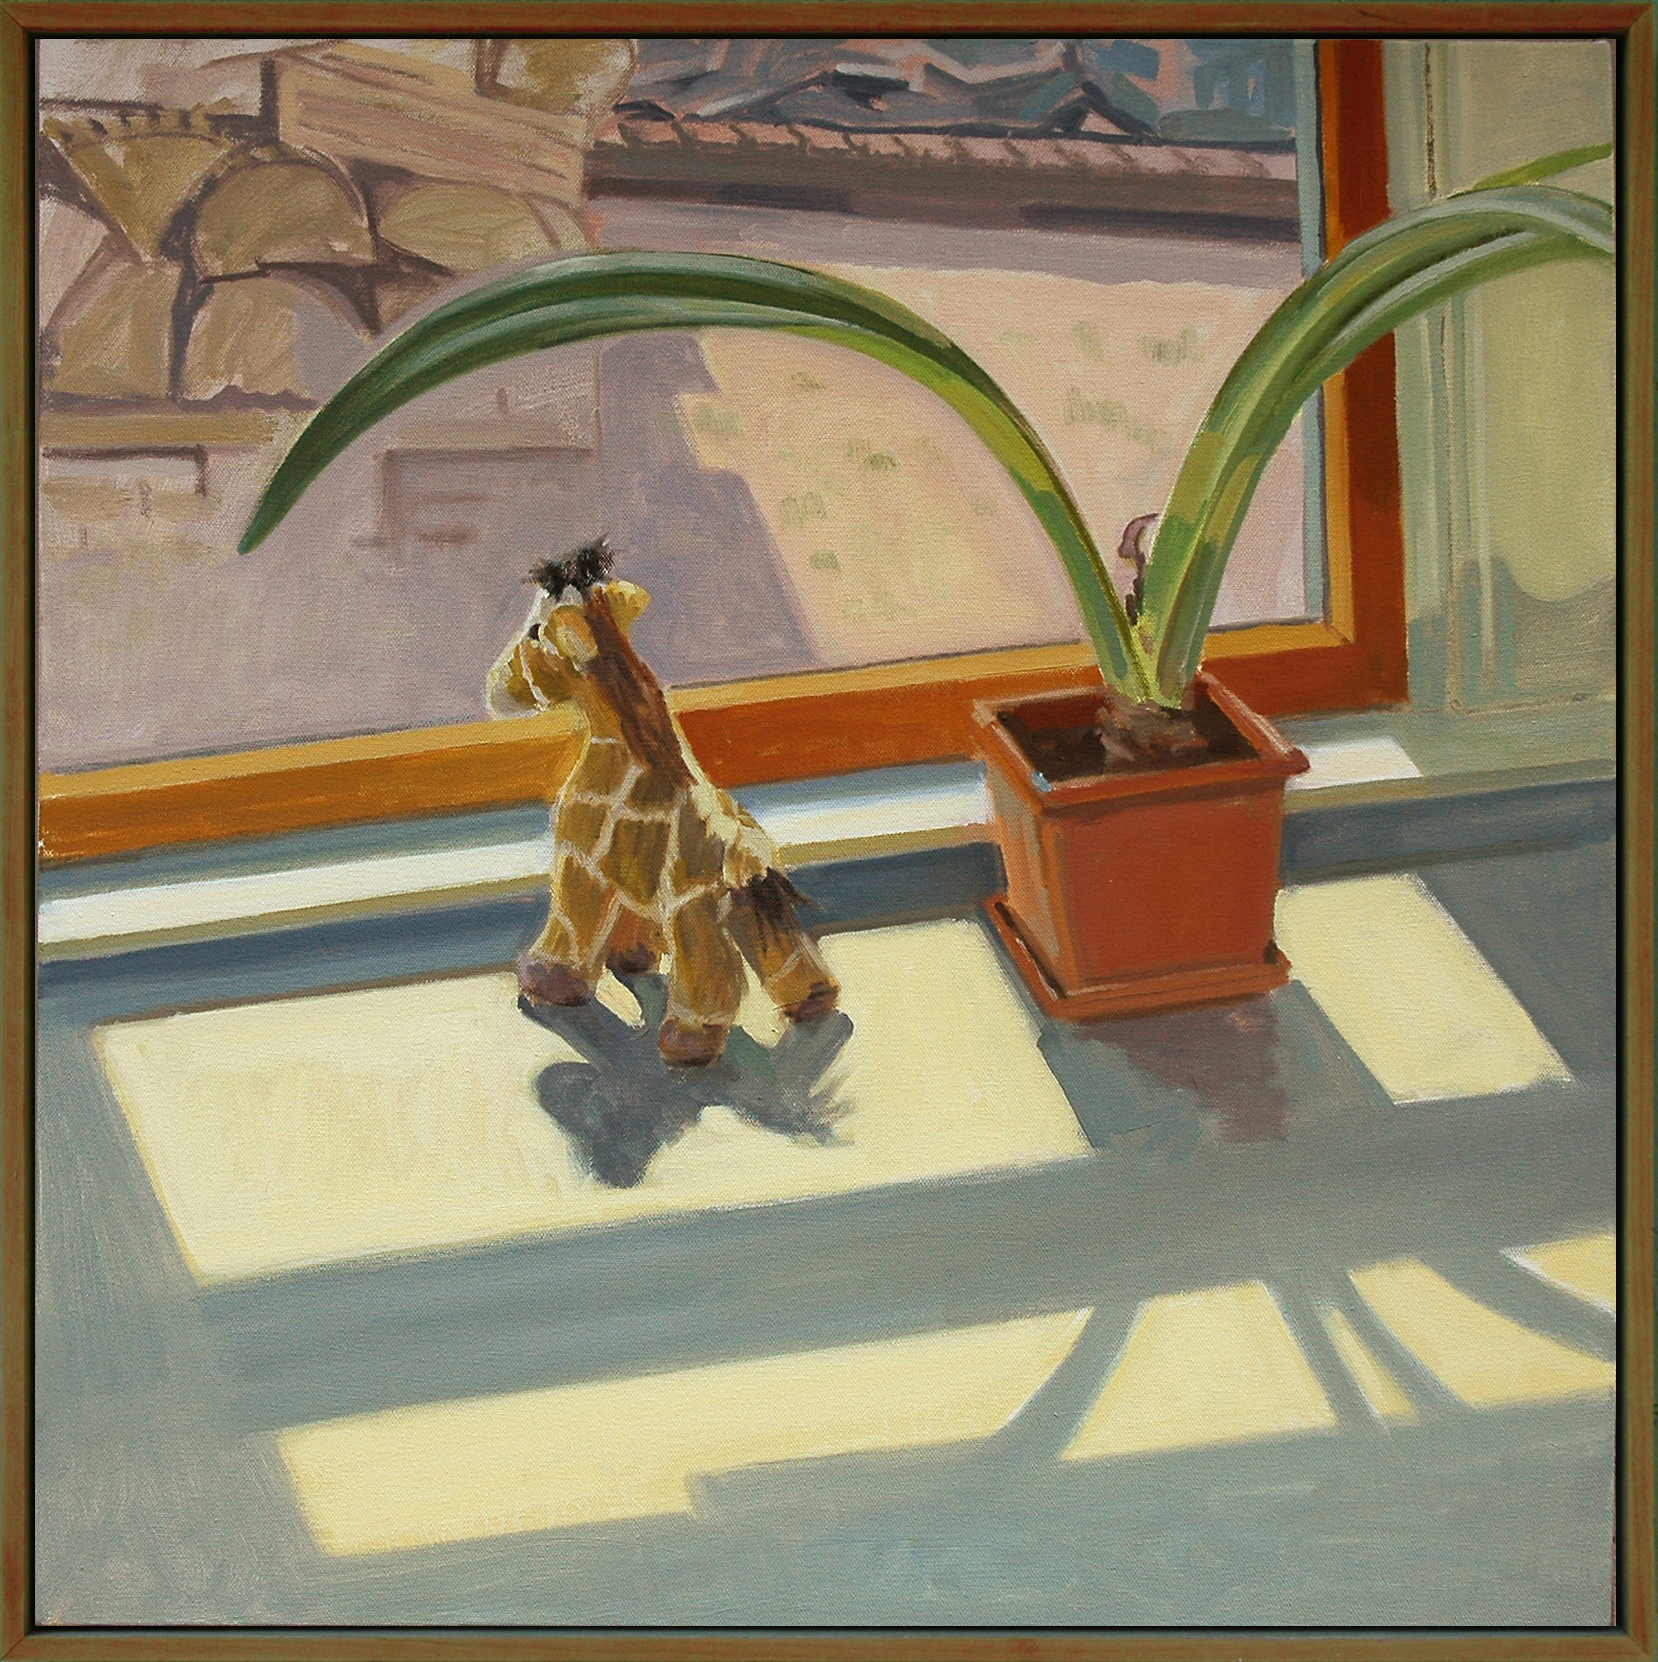 "Earnest on the Lookout", oil on canvas, 24" x 24", 2019